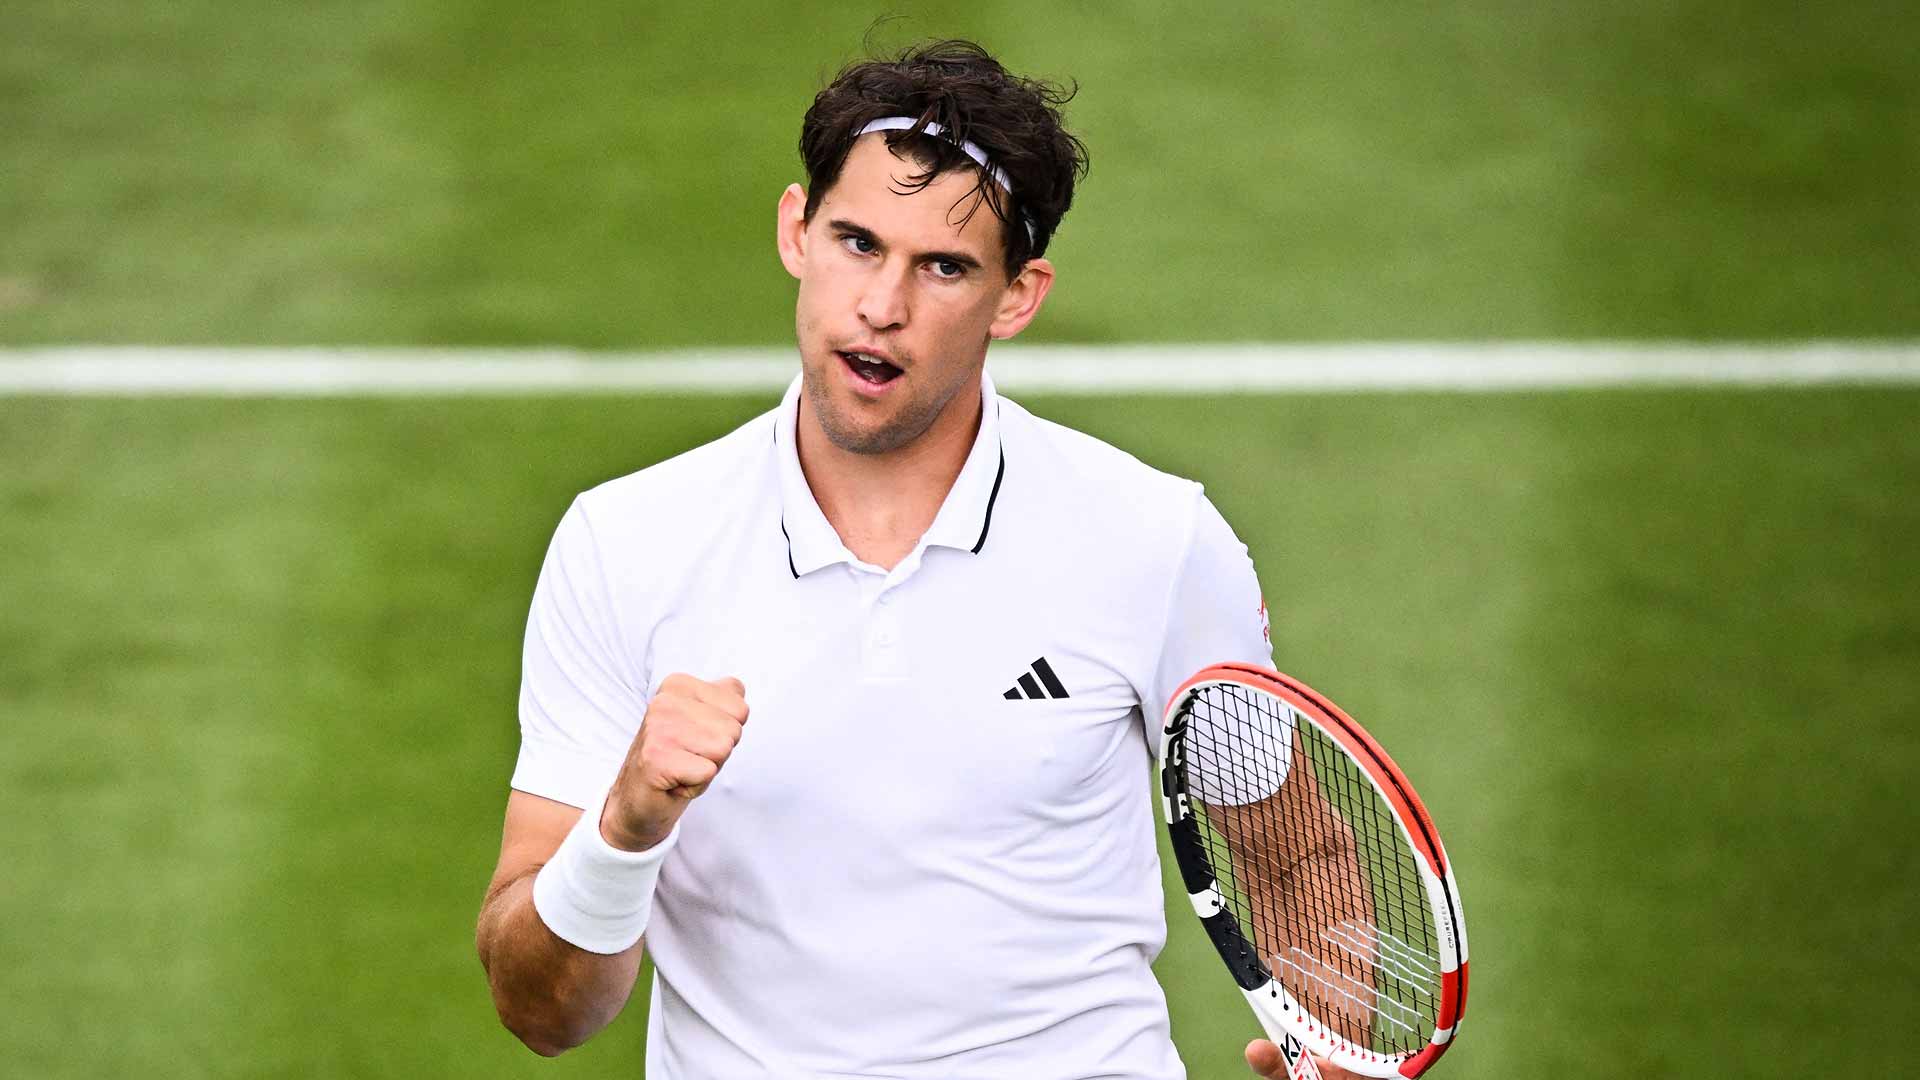 Dominic Thiem took the first set against Stefanos Tsitsipas before rain interrupted the pair's first-round clash on Tuesday at Wimbledon.